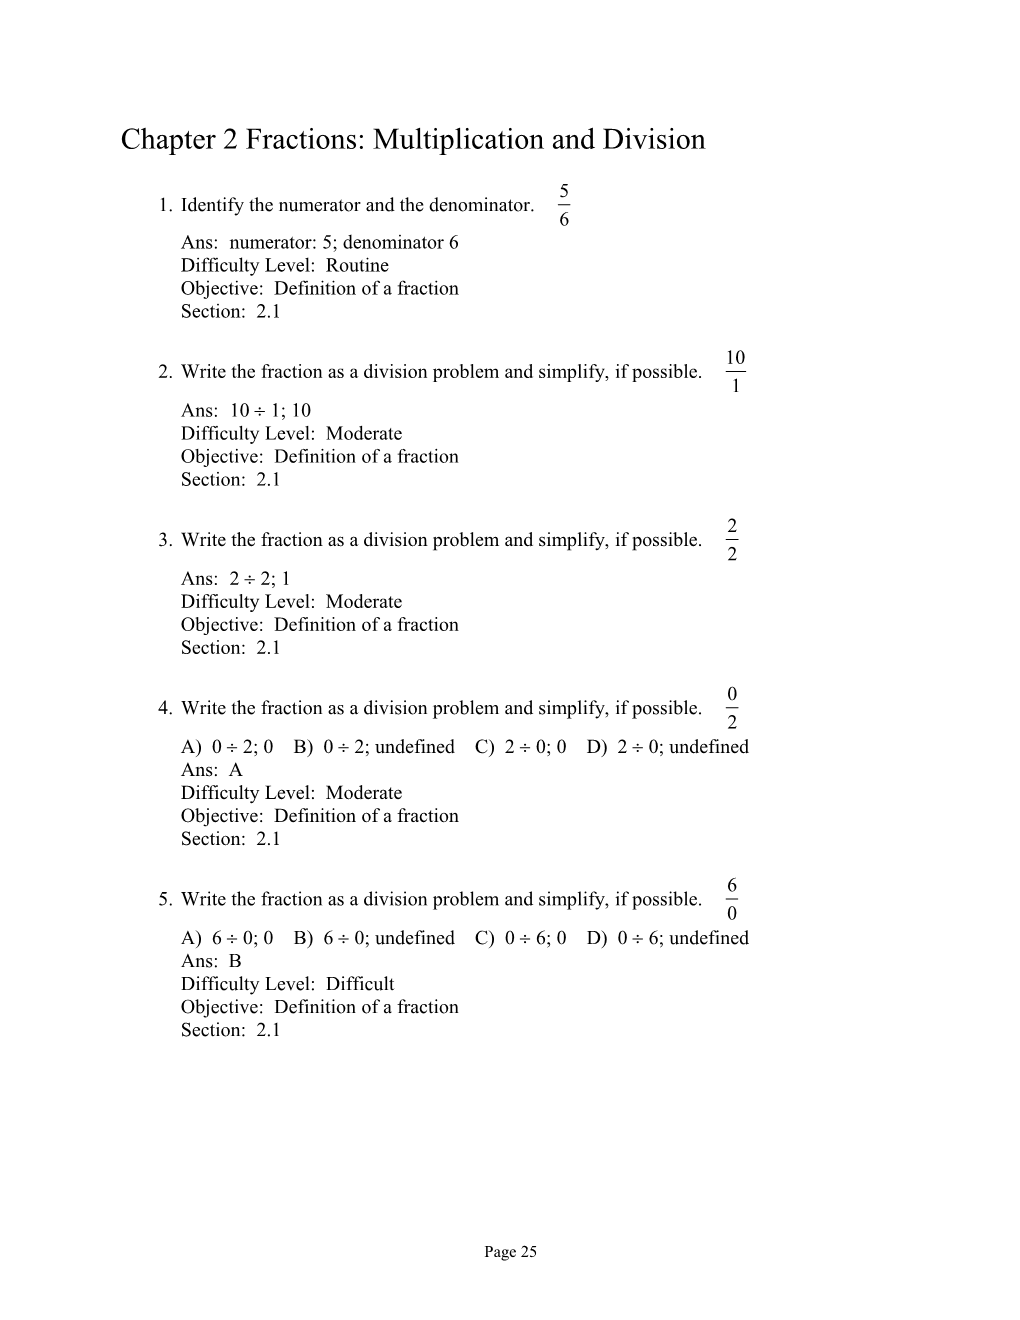 Chapter 2 Fractions: Multiplication and Division